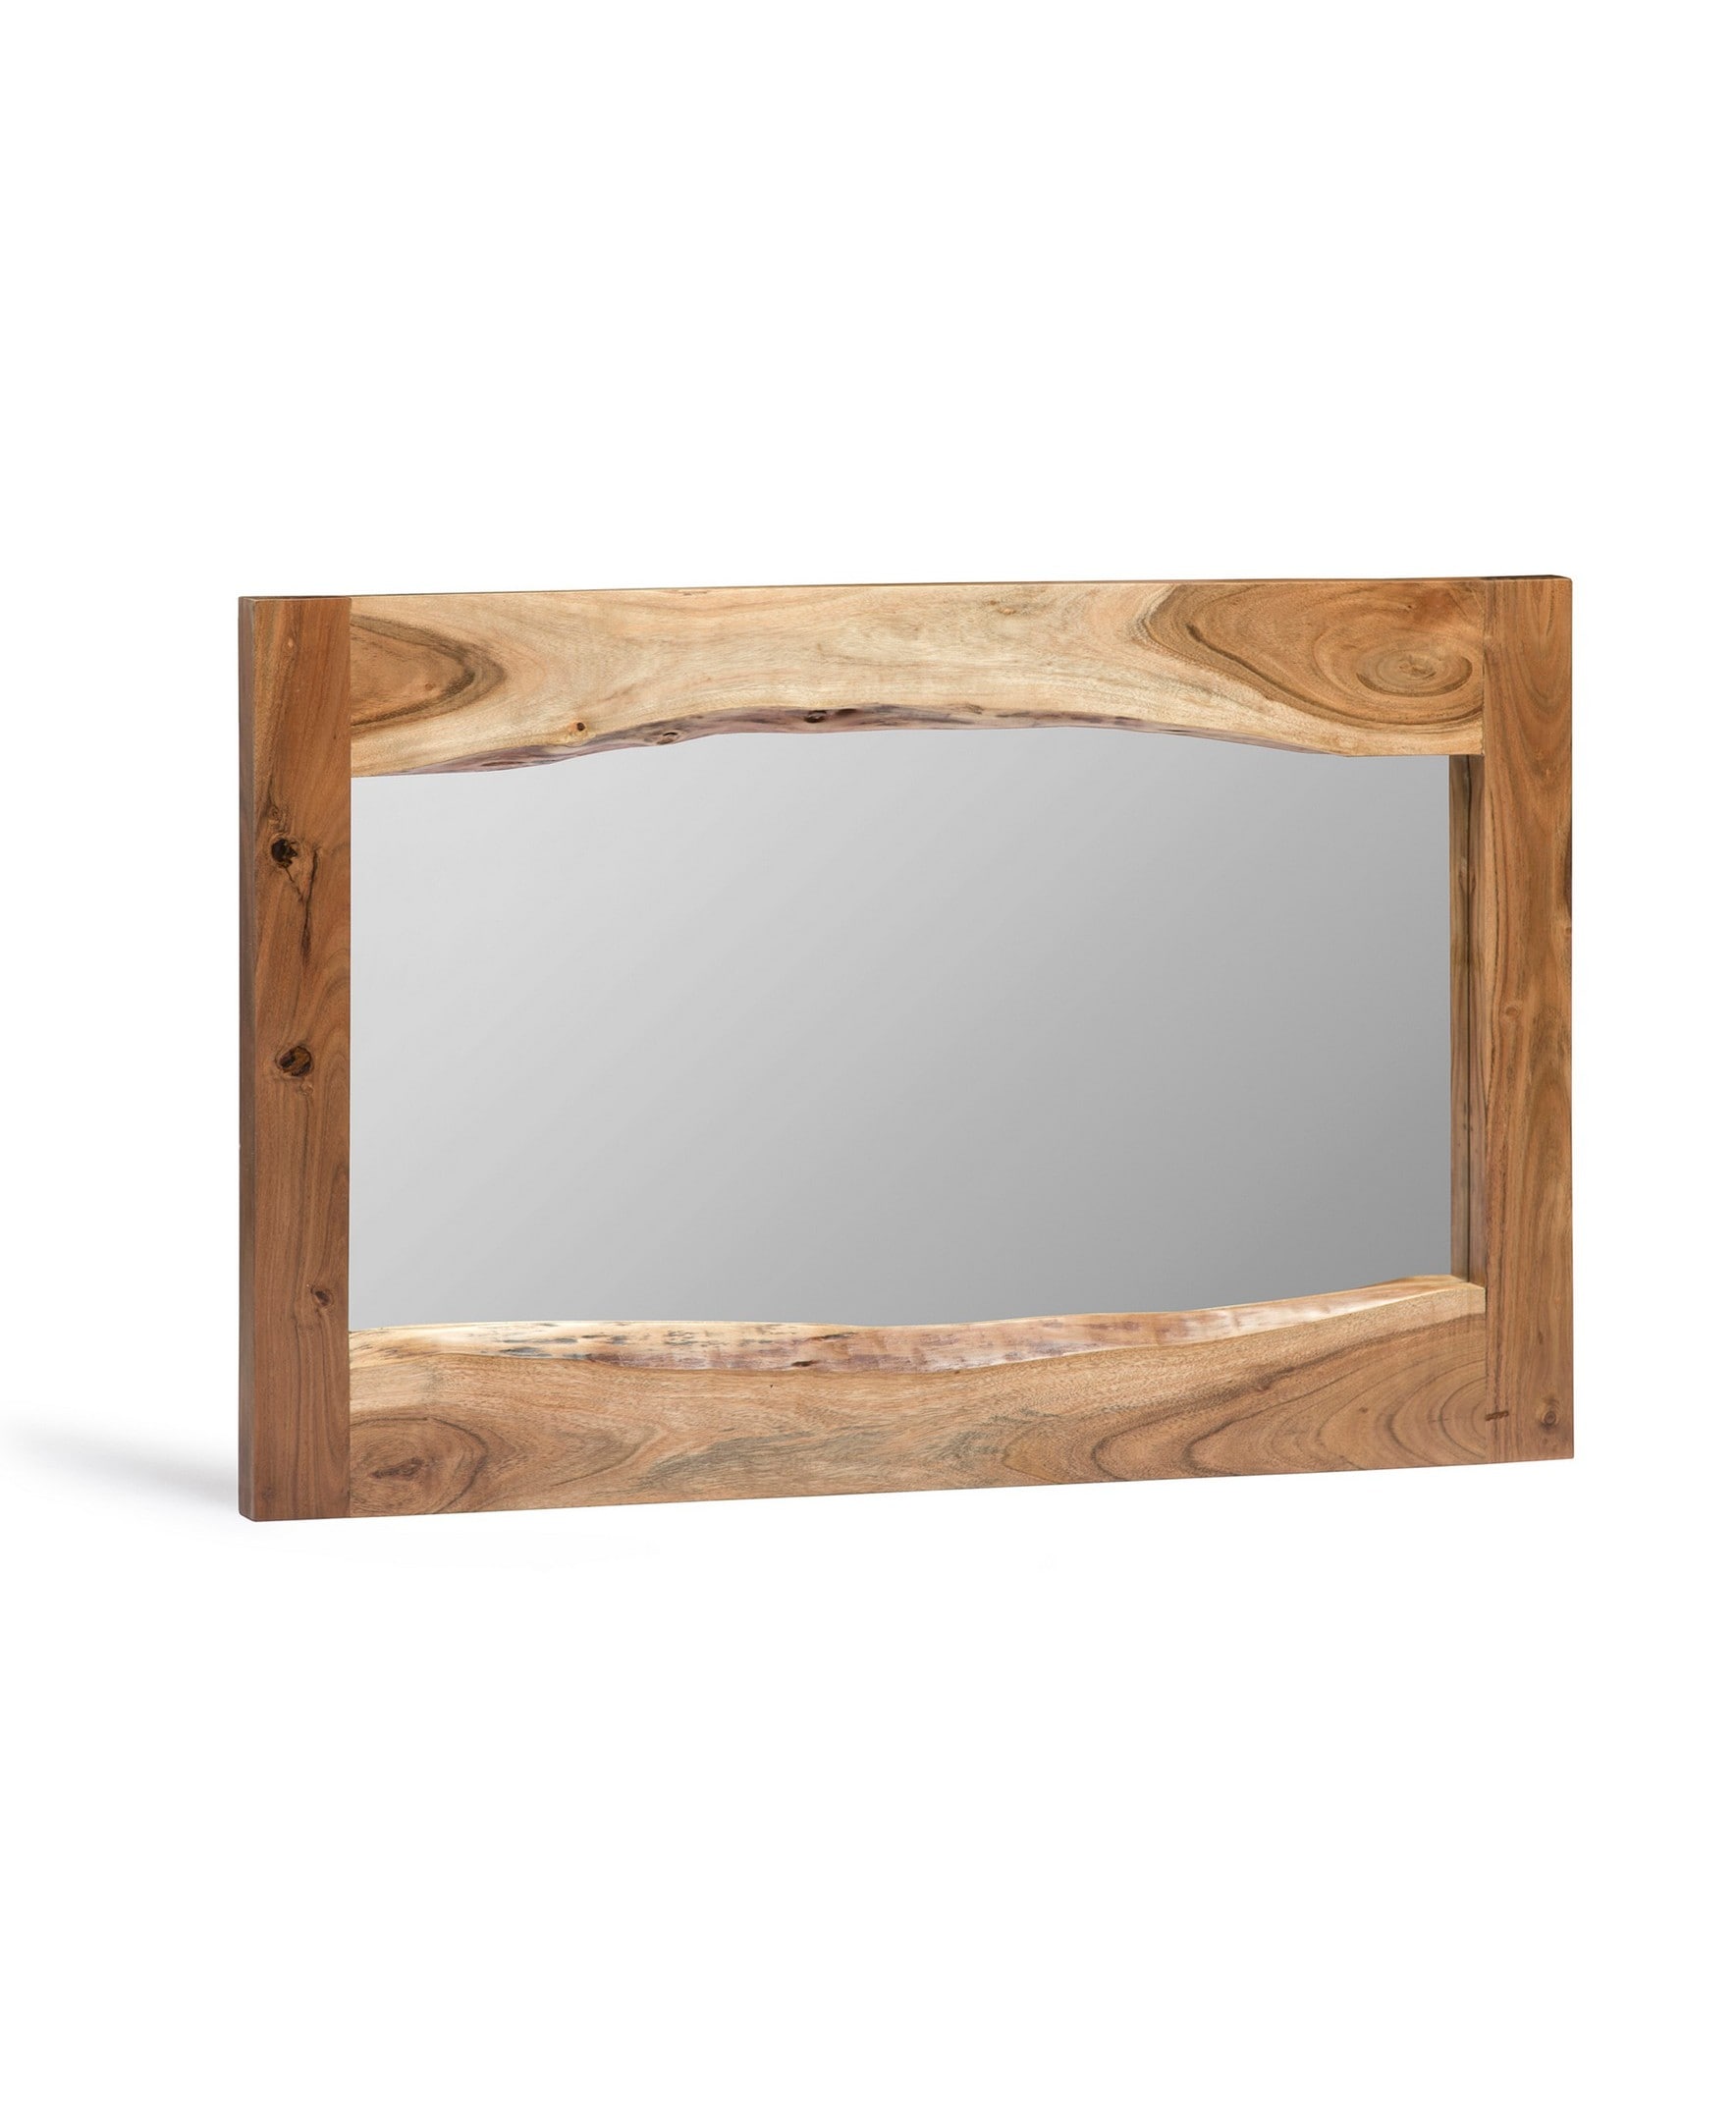 Alaterre Furniture Alpine 36-in W x 24-in H Natural Framed Wall